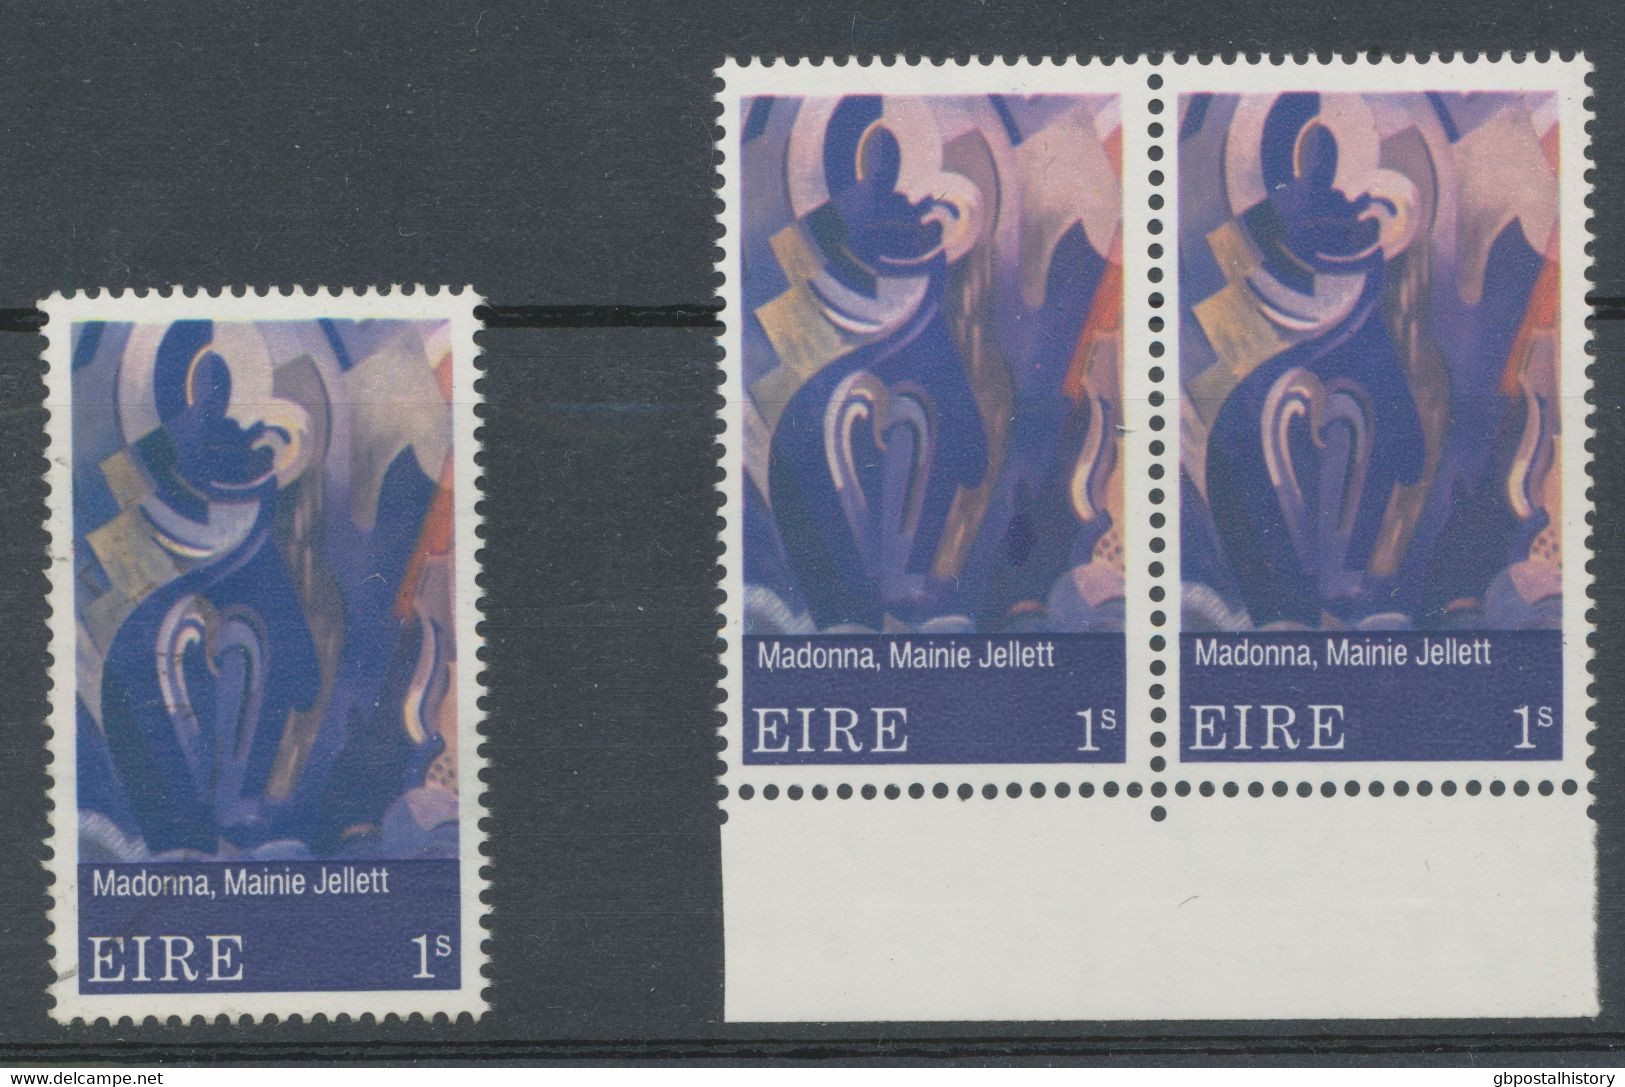 IRELAND 1970 Contemporary Irish Art 1S Superb Used MAJOR VARIETY COLOR PINK On The Left Stamp Is Almost Complete MISSING - Usati